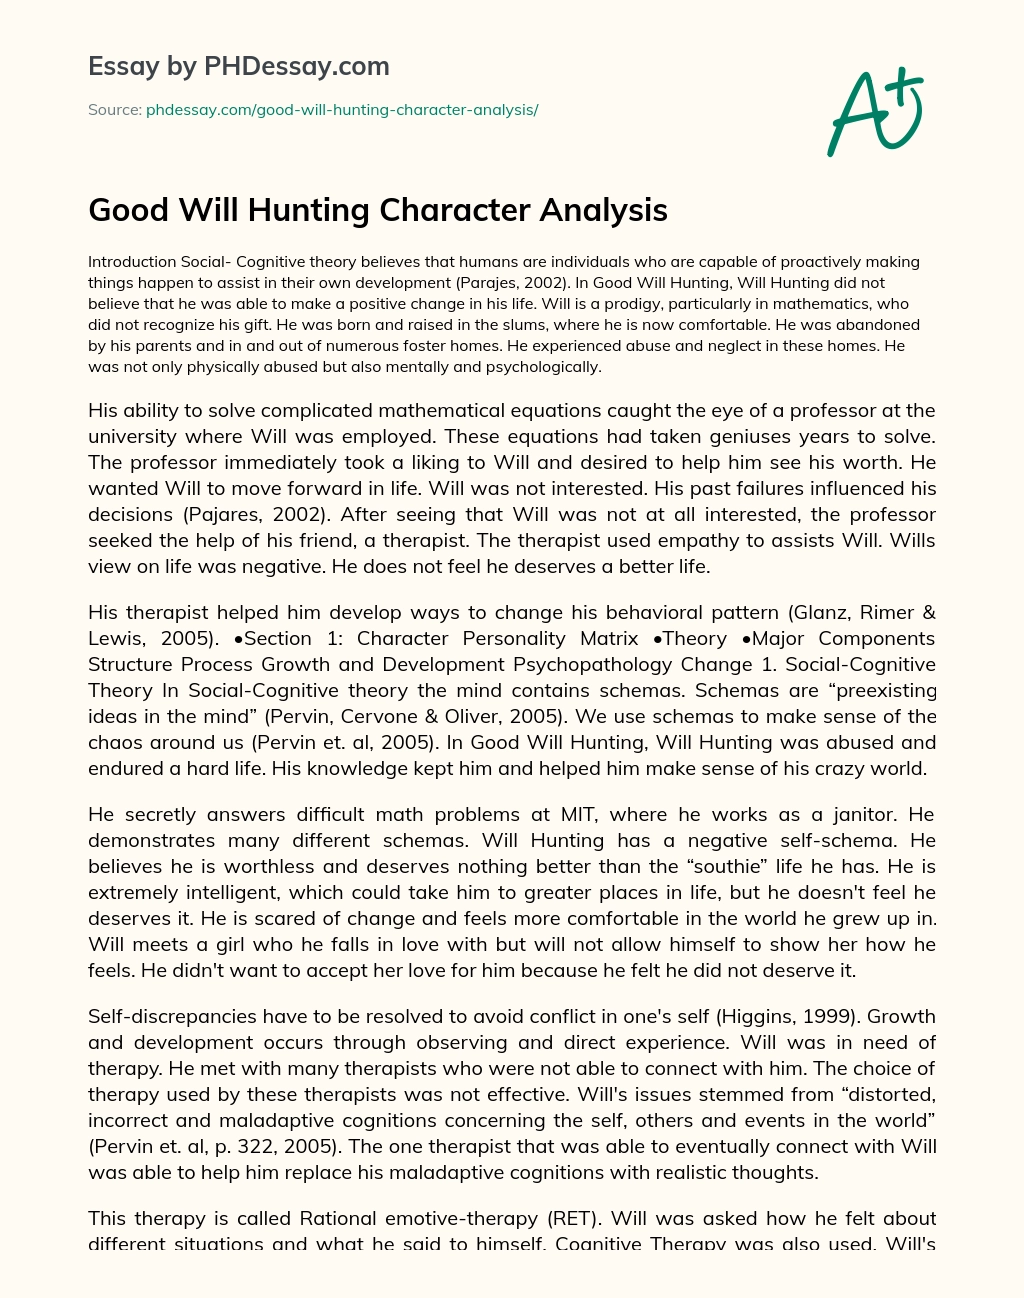 Good Will Hunting Character Analysis essay